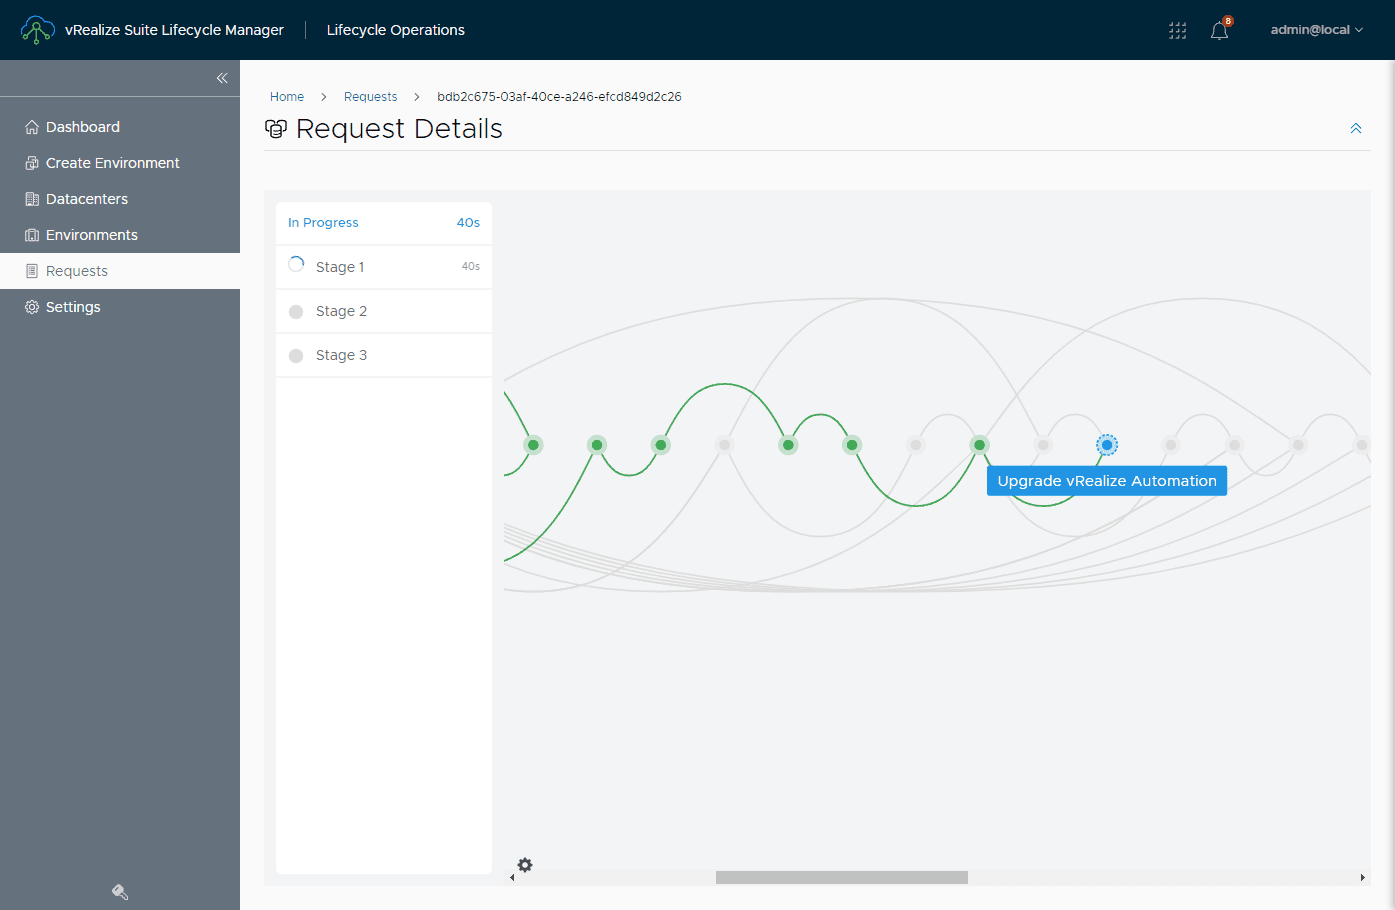 The process to upgrade vRealize Automation with vRSLCM begins and progresses